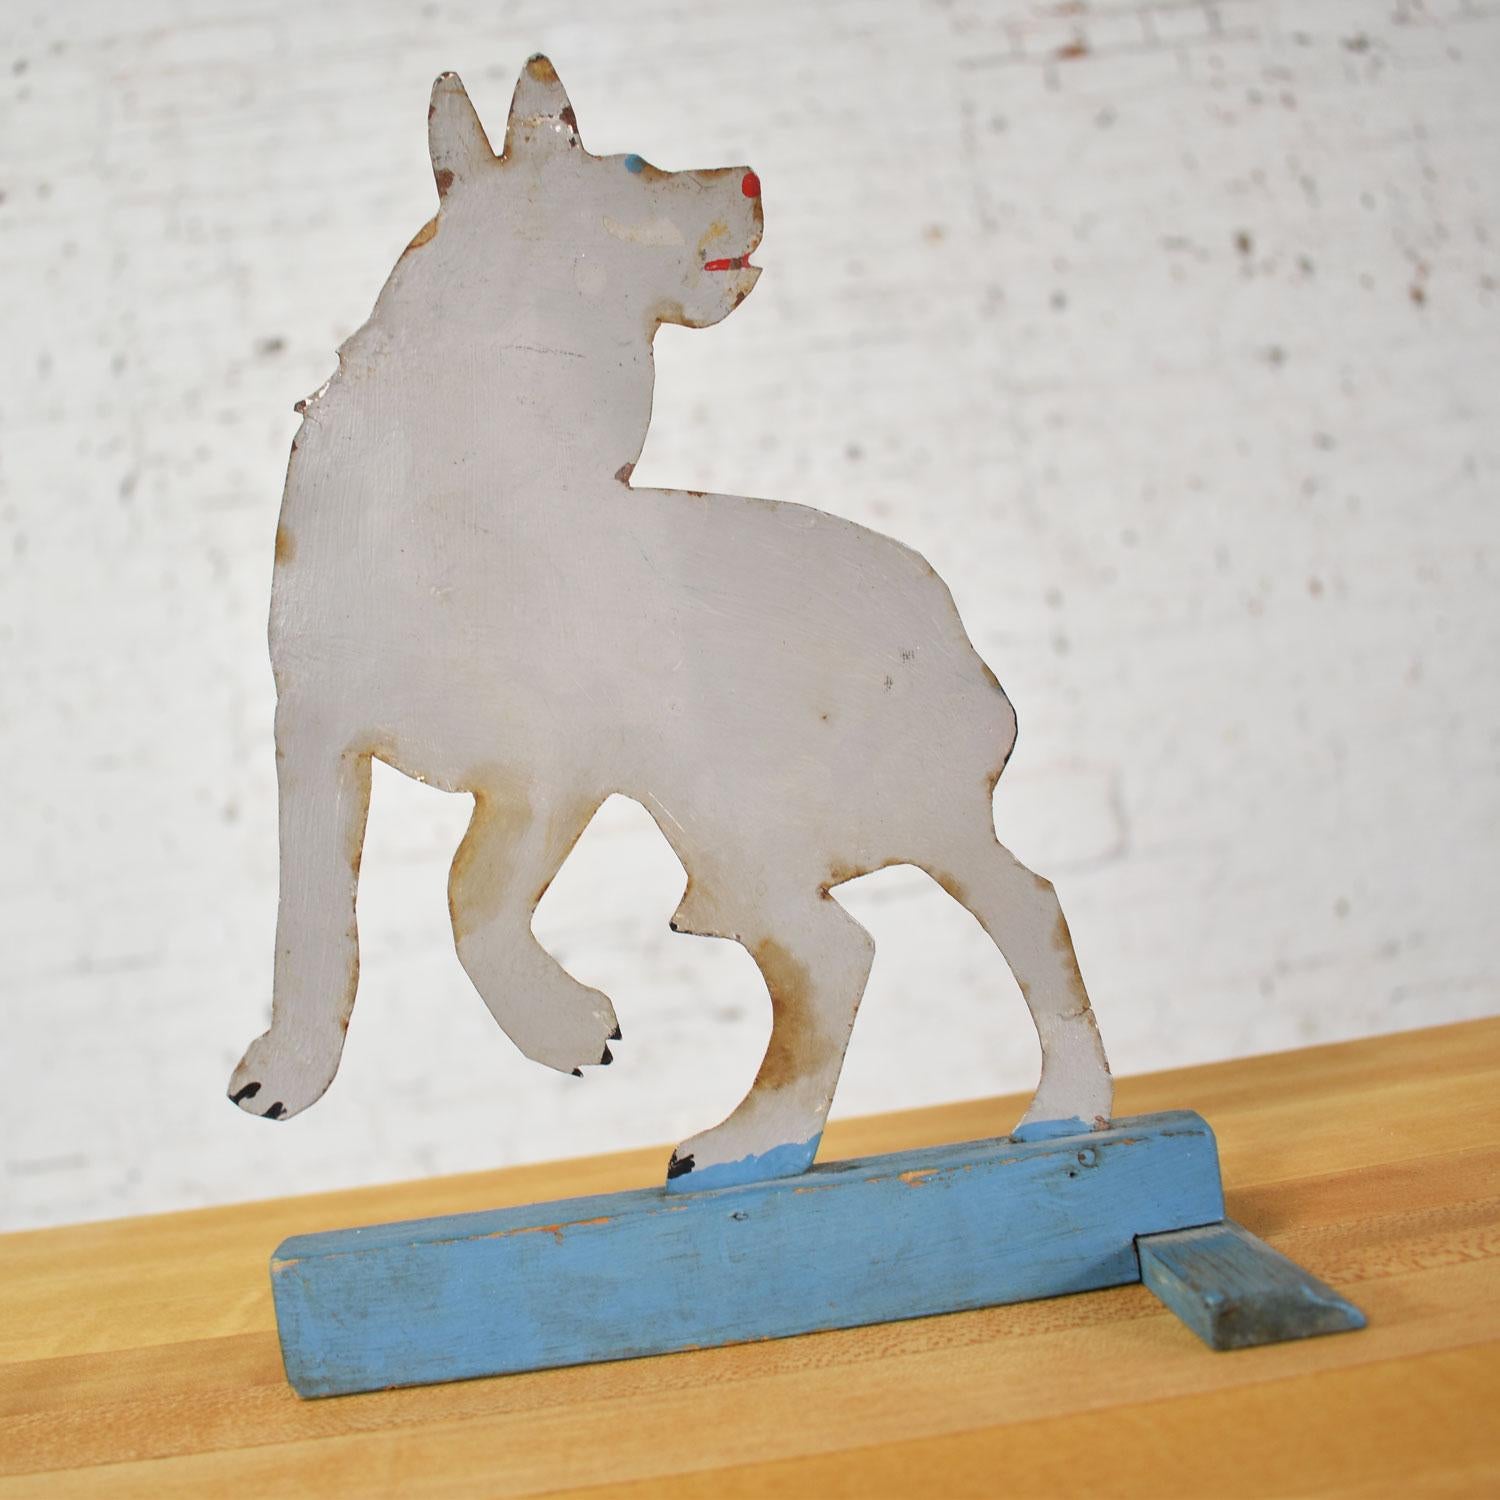 painted wooden dog cutouts